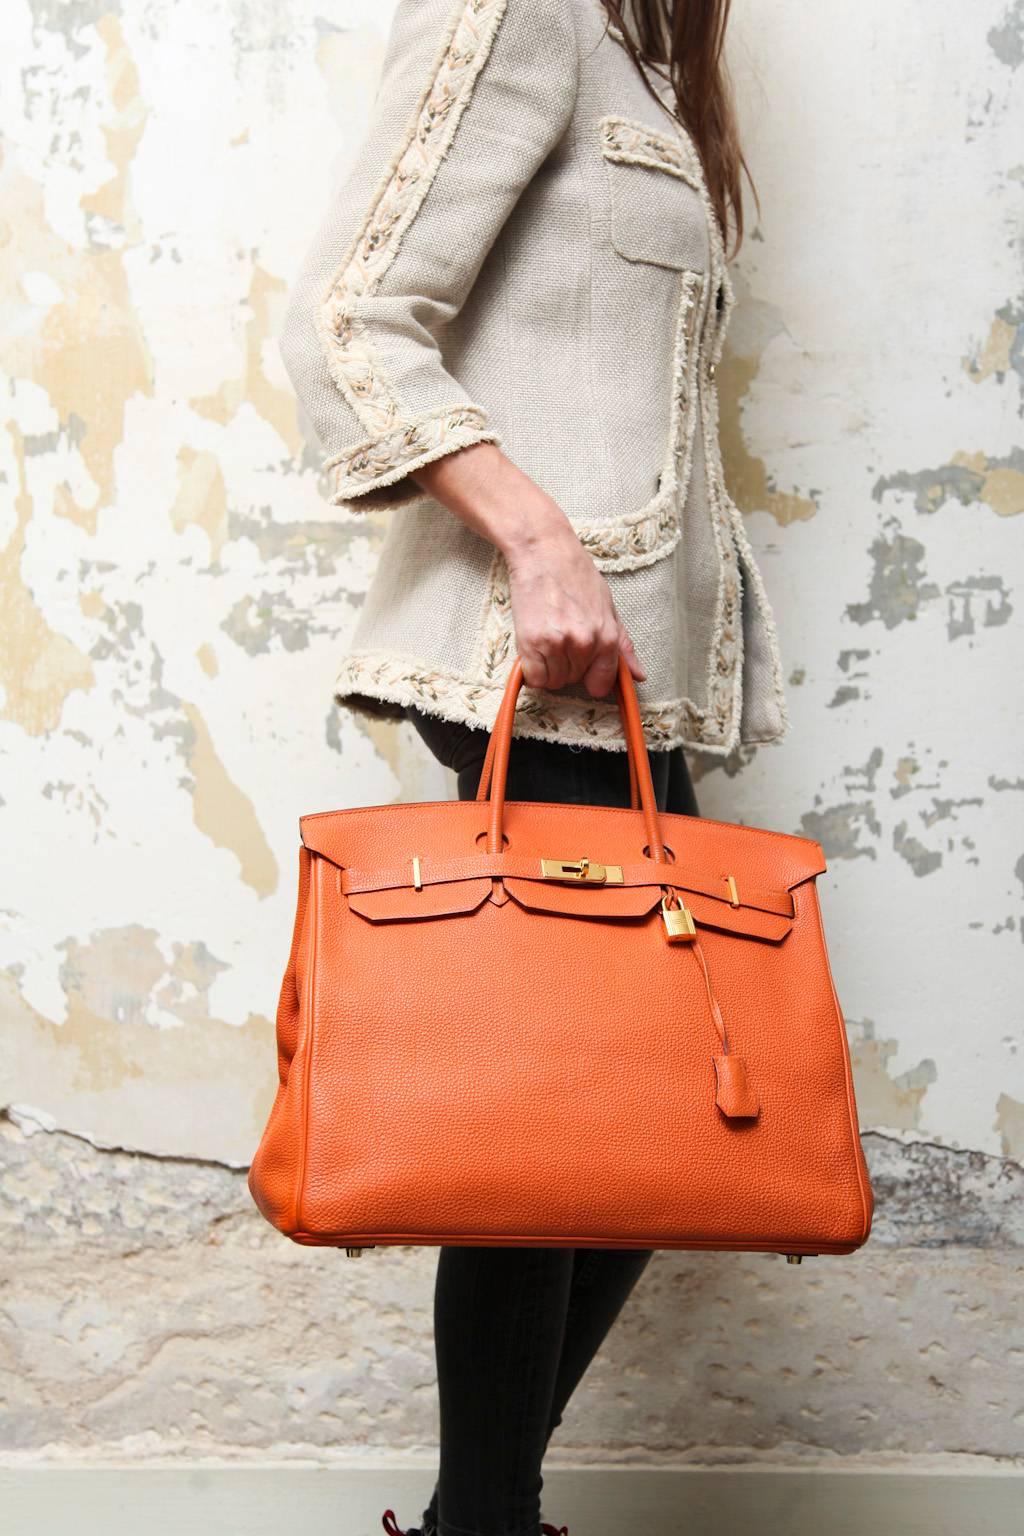 Hermès 'Birkin 40' bag in orange togo leather. Gold hardware. Stamp M Year 2009. 
Included : Zipper, clochette, padlock and keys.

Made in France. 

Will be delivered in its dust bag and Hermes box